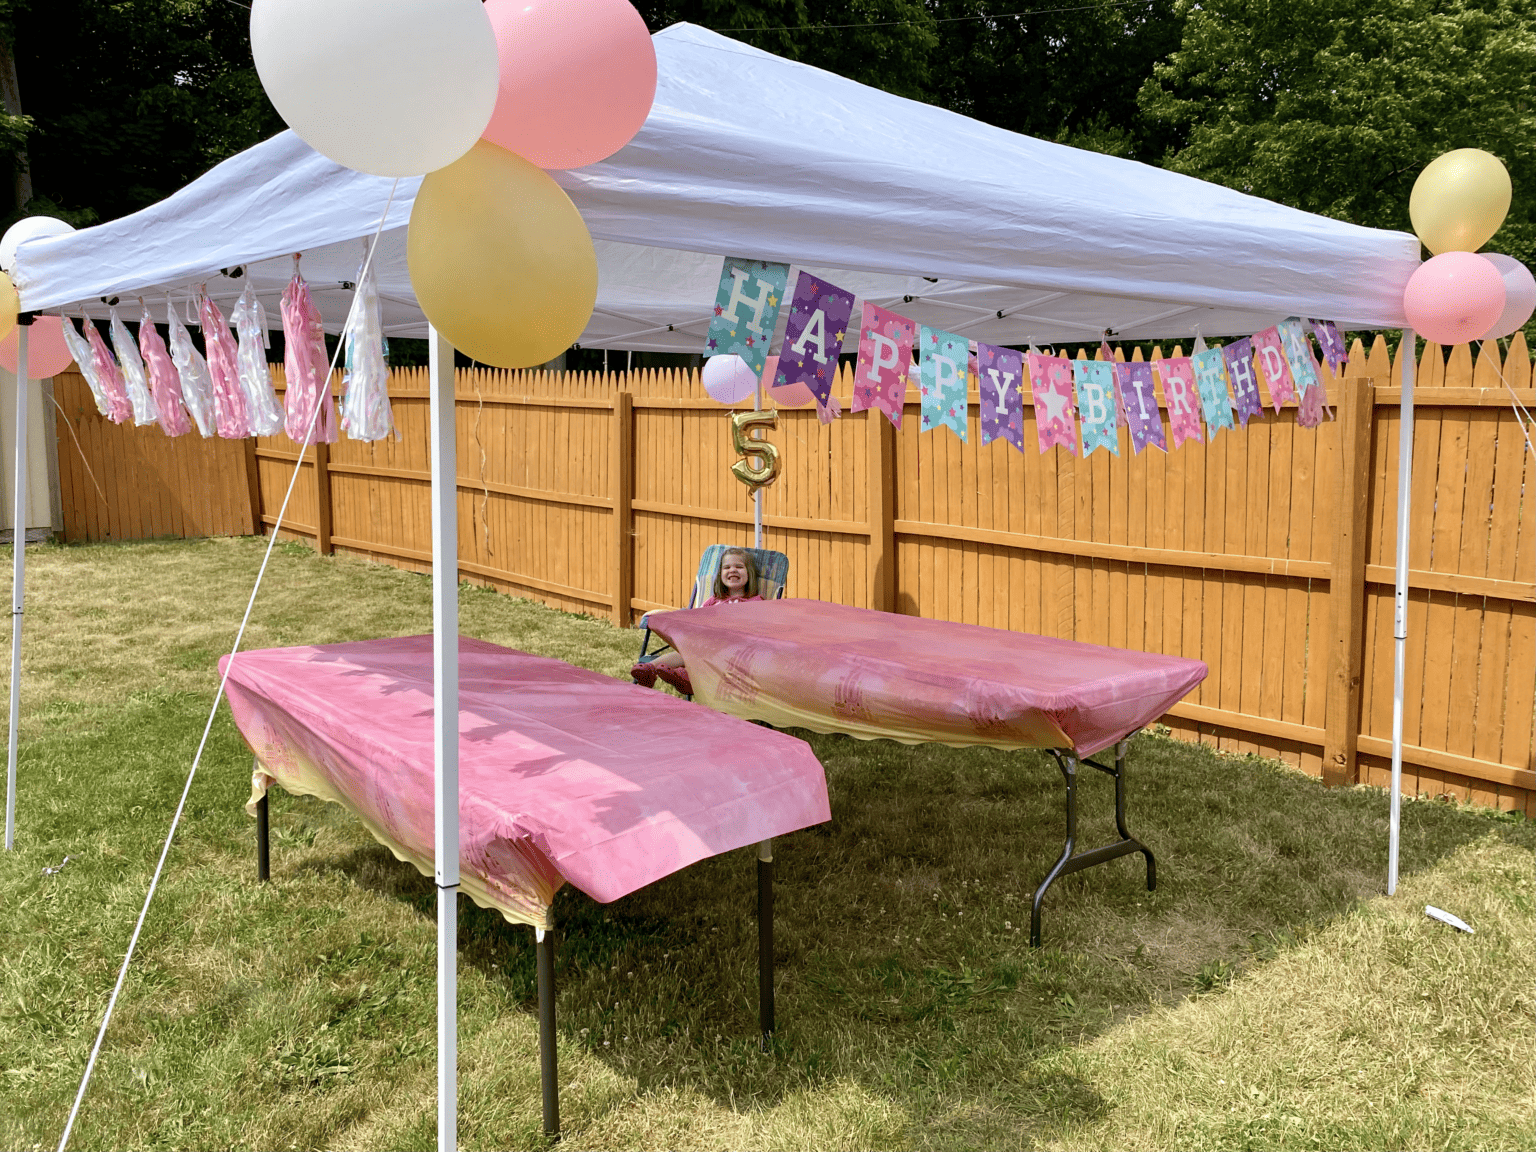 Princess Birthday Party Ideas For A Little Girl